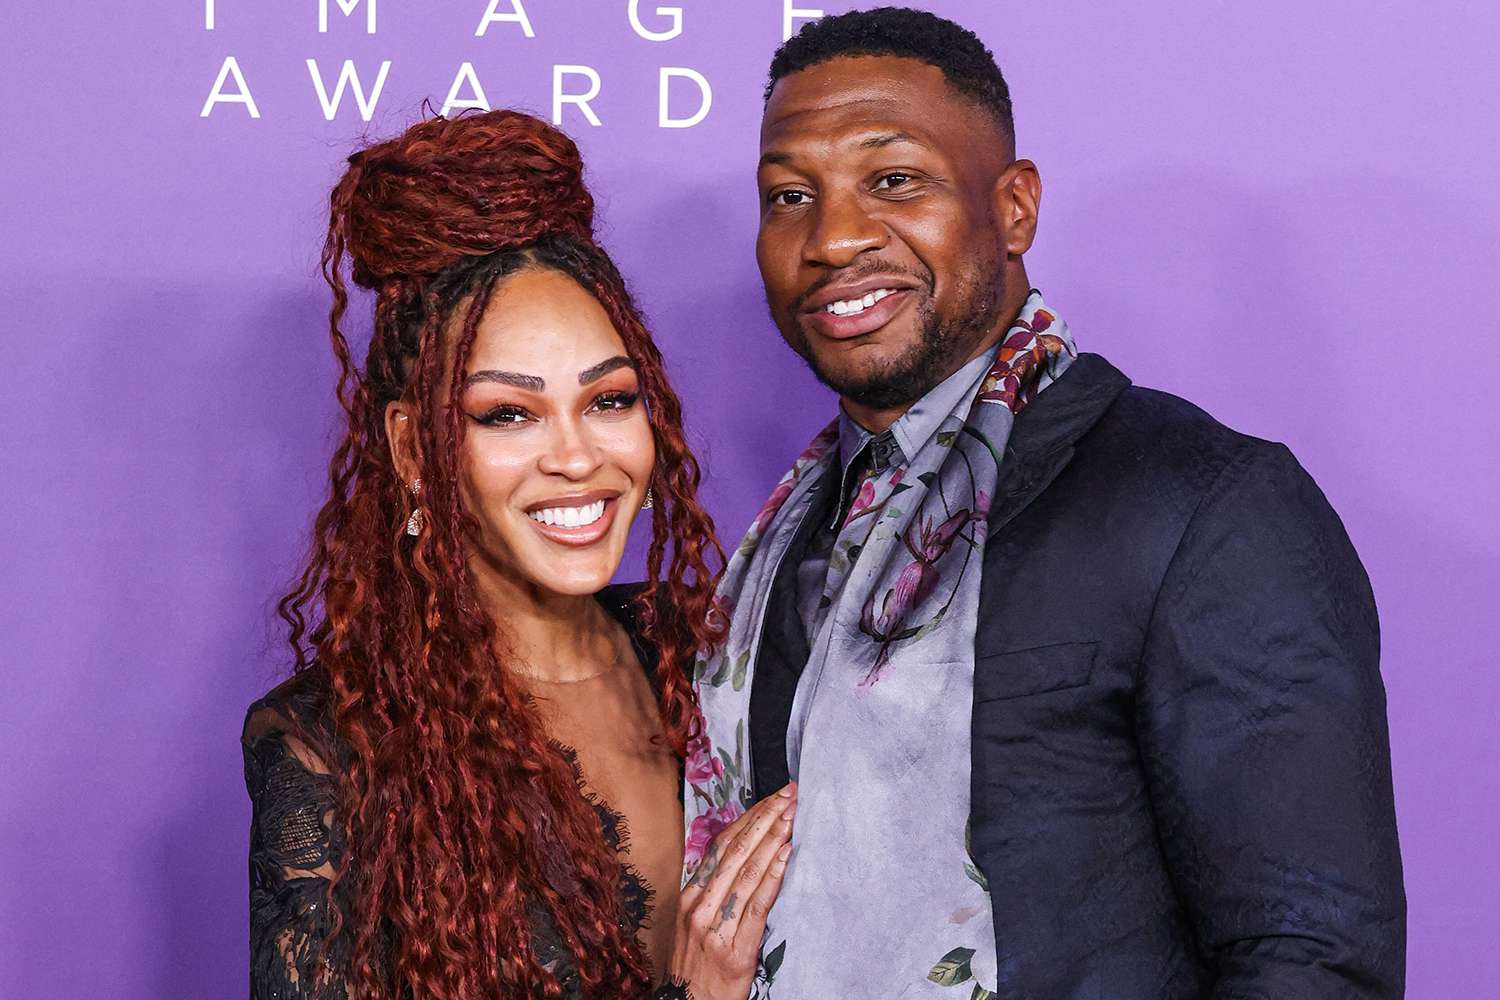 Meagan Good and boyfriend Jonathan Majors arrive at the 55th Annual NAACP Image Awards held at the Shrine Auditorium and Expo Hall on March 16, 2024 in Los Angeles, California, United States.